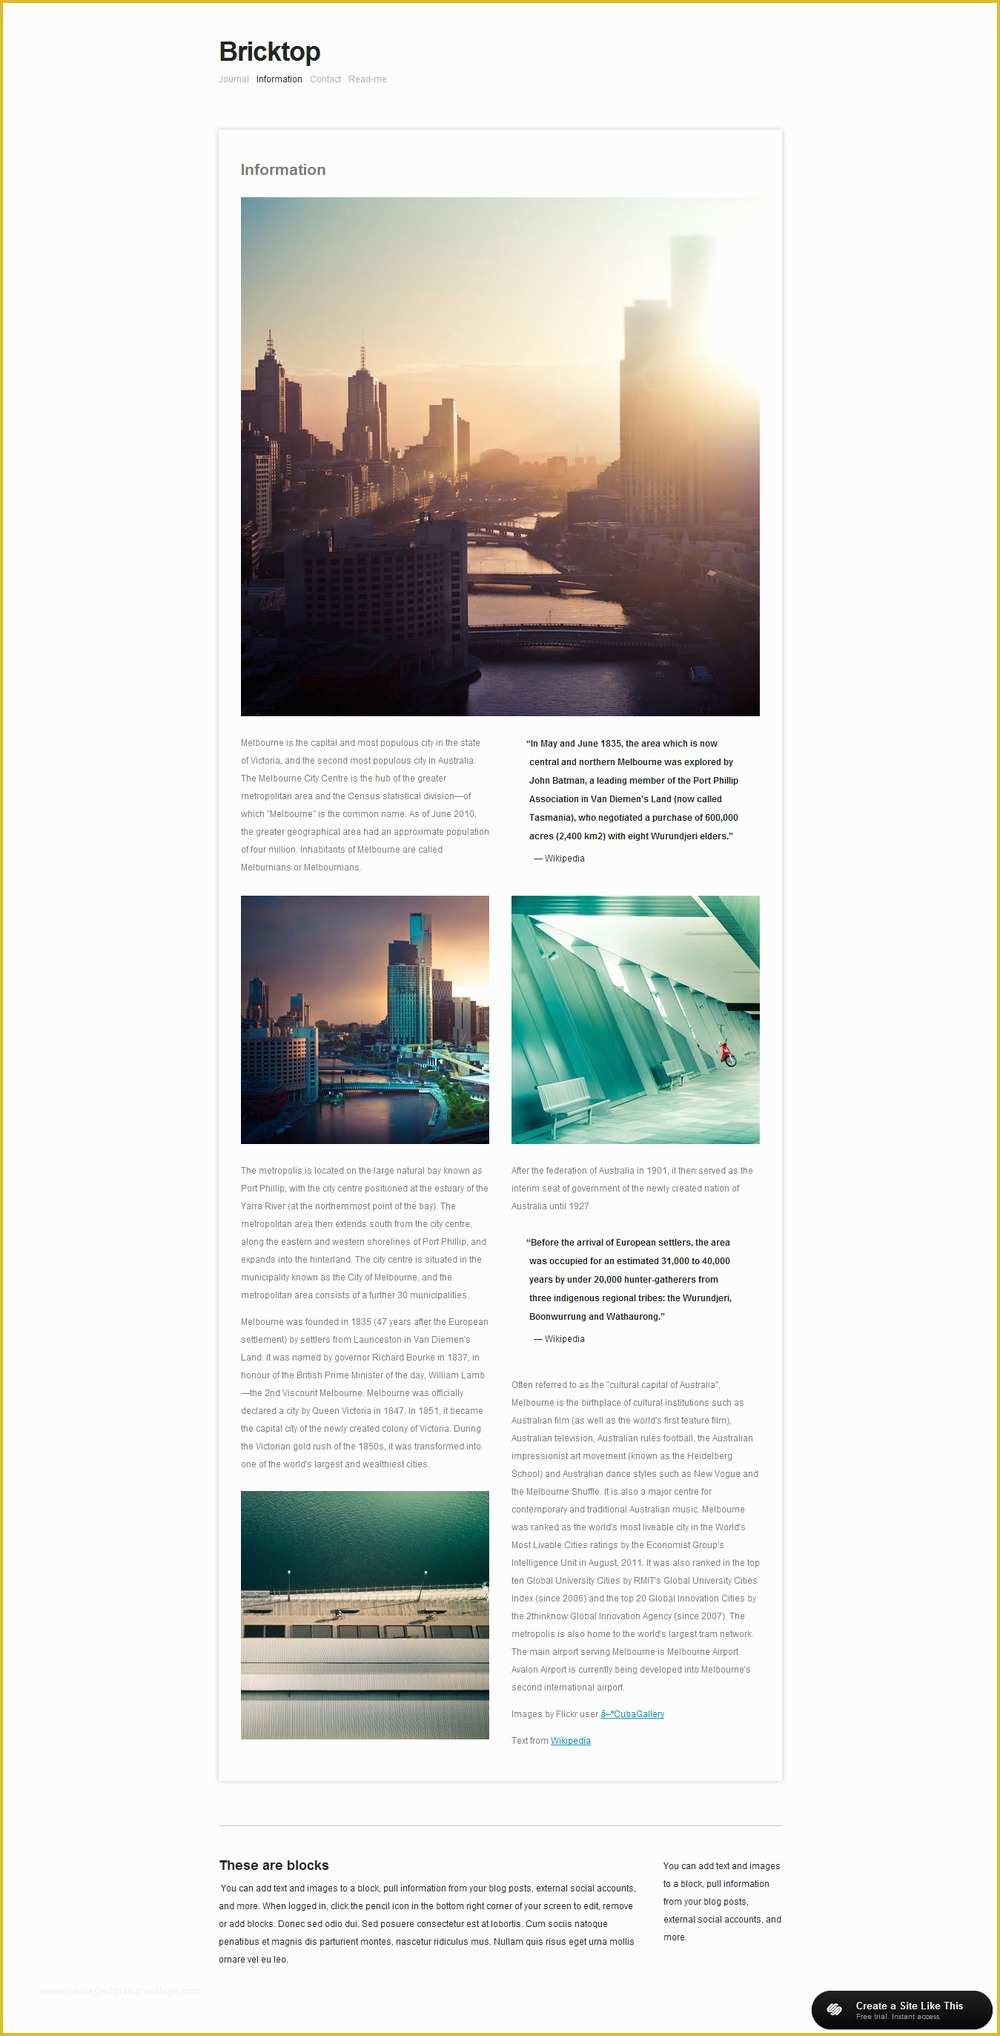 Free Website Templates Squarespace Of Squarespace Templates Your Guide to Planning Squarespace